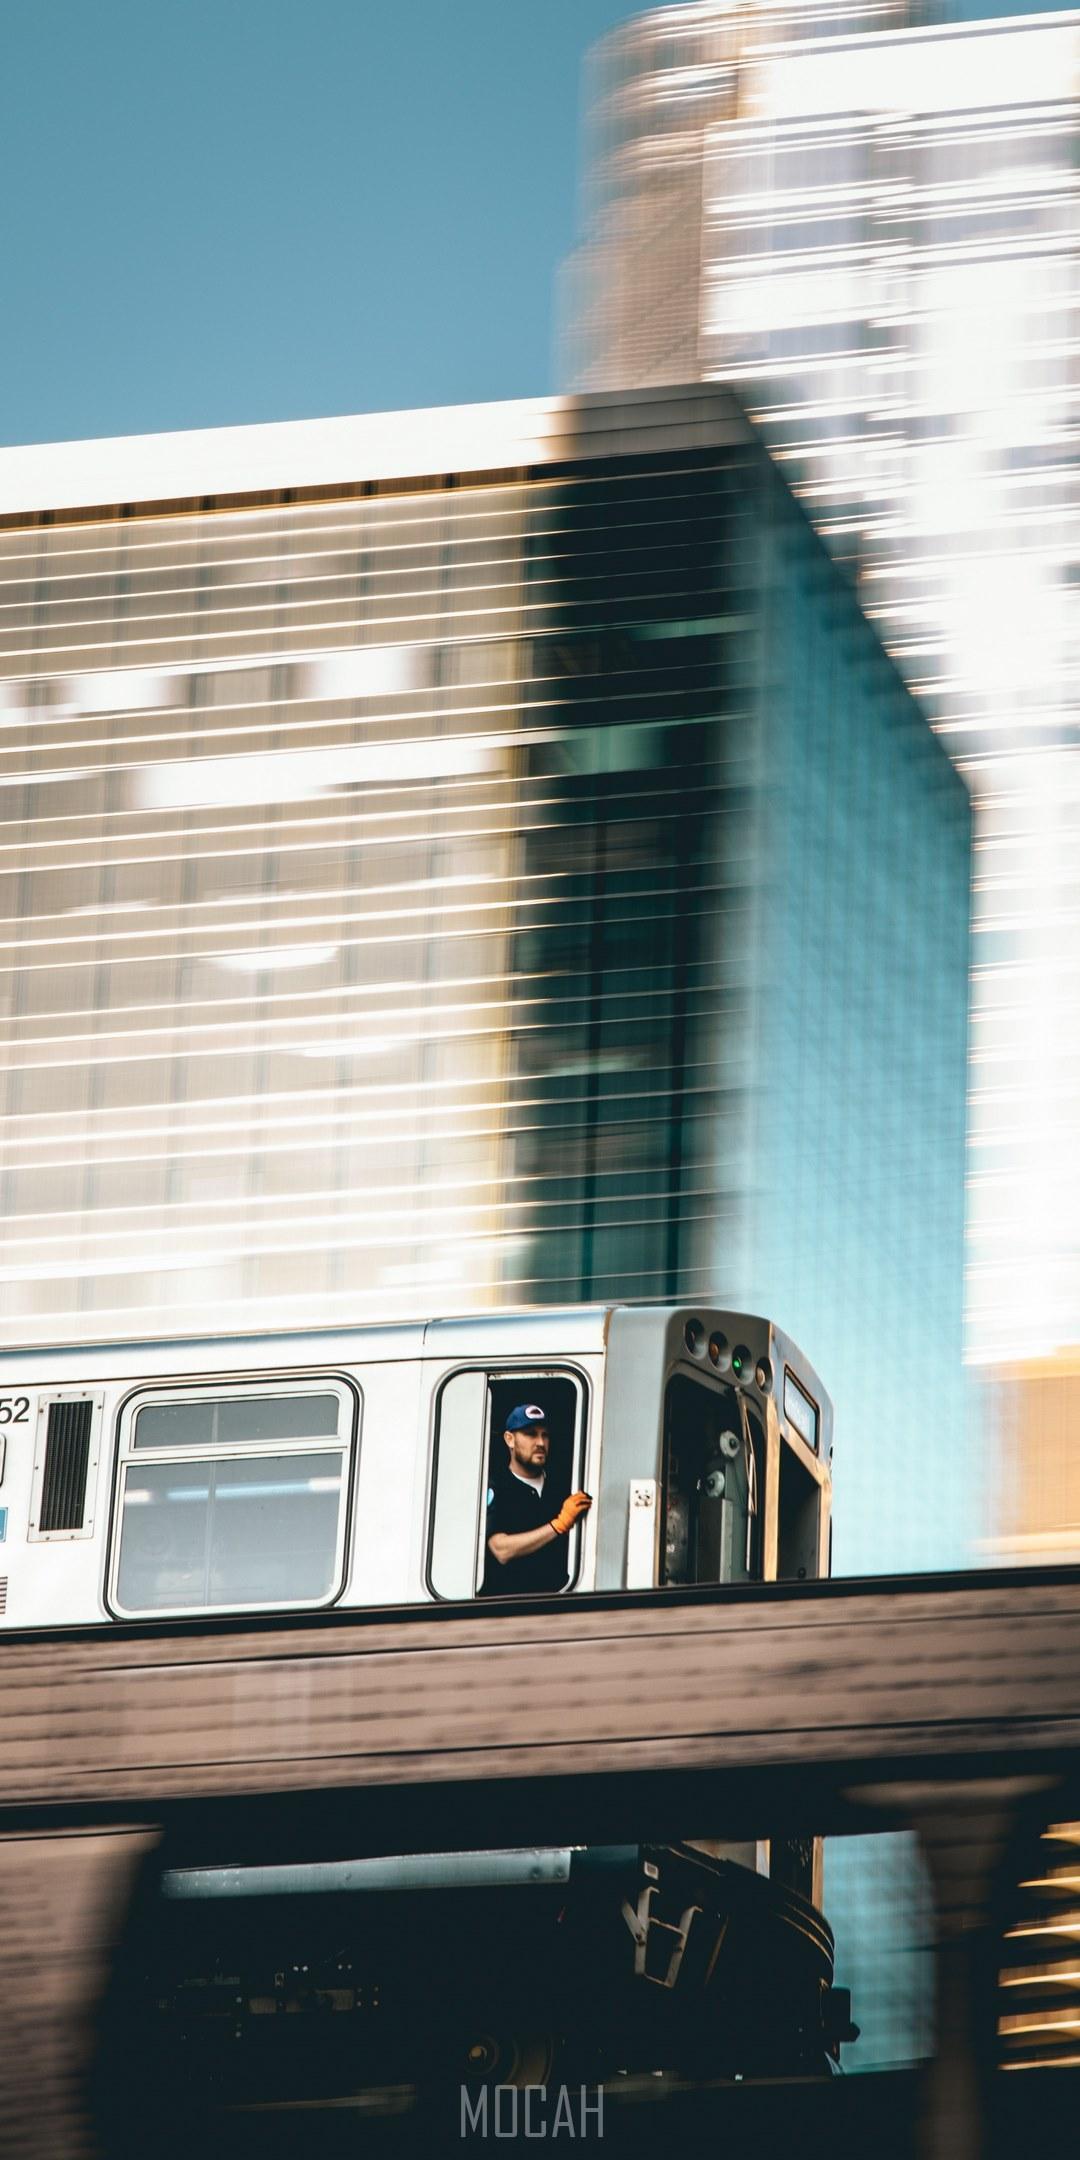 HD wallpaper, A Man Looking Out Of A Moving Urban Trail In Chicago, 1080X2160, Man In A Moving Urban Train, Lg Q Stylo 4 Screensaver